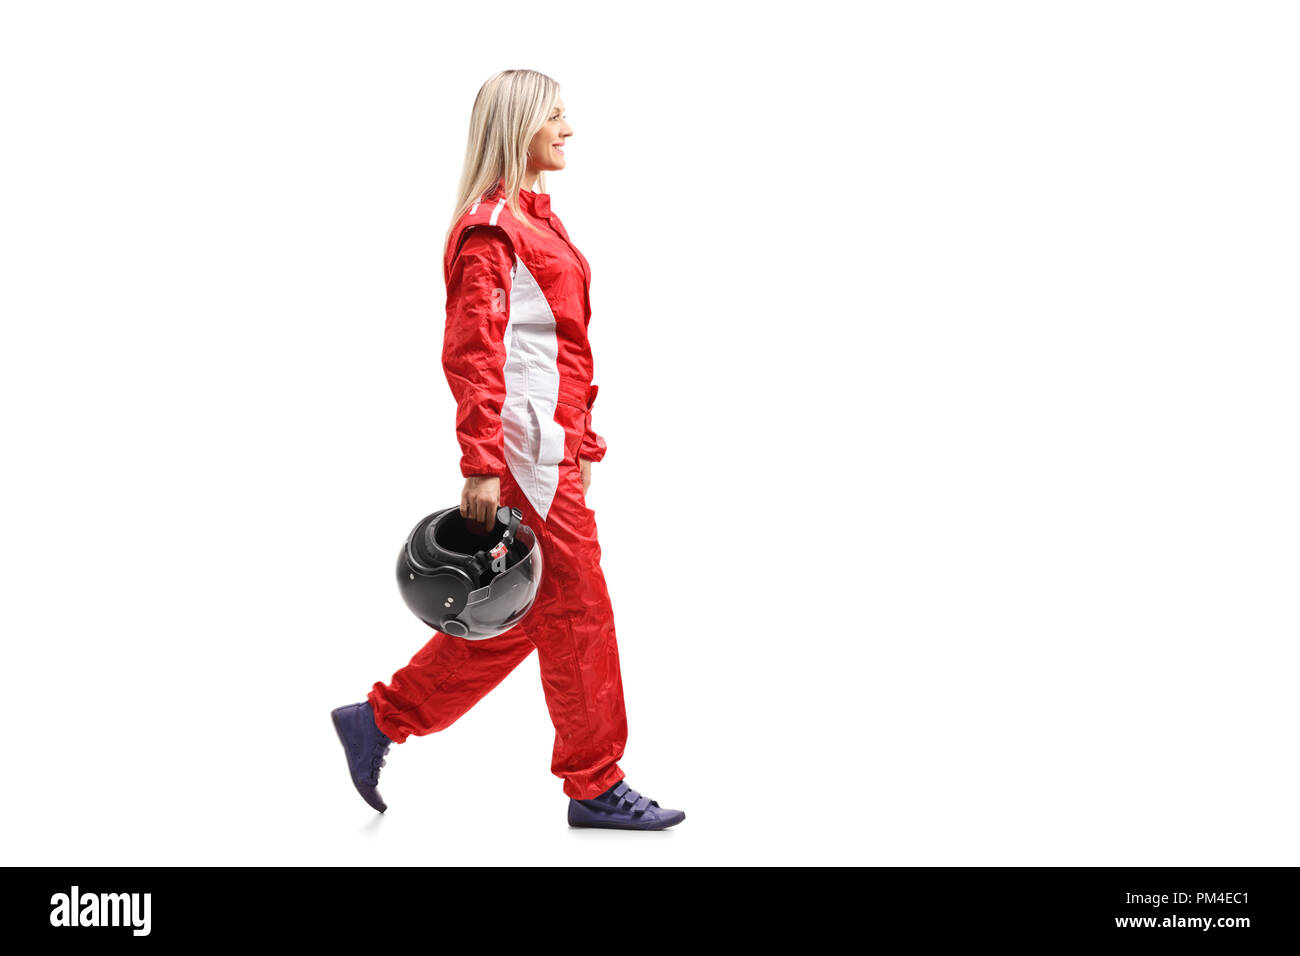 Female racer walking and holding a helmet isolated on white background Stock Photo